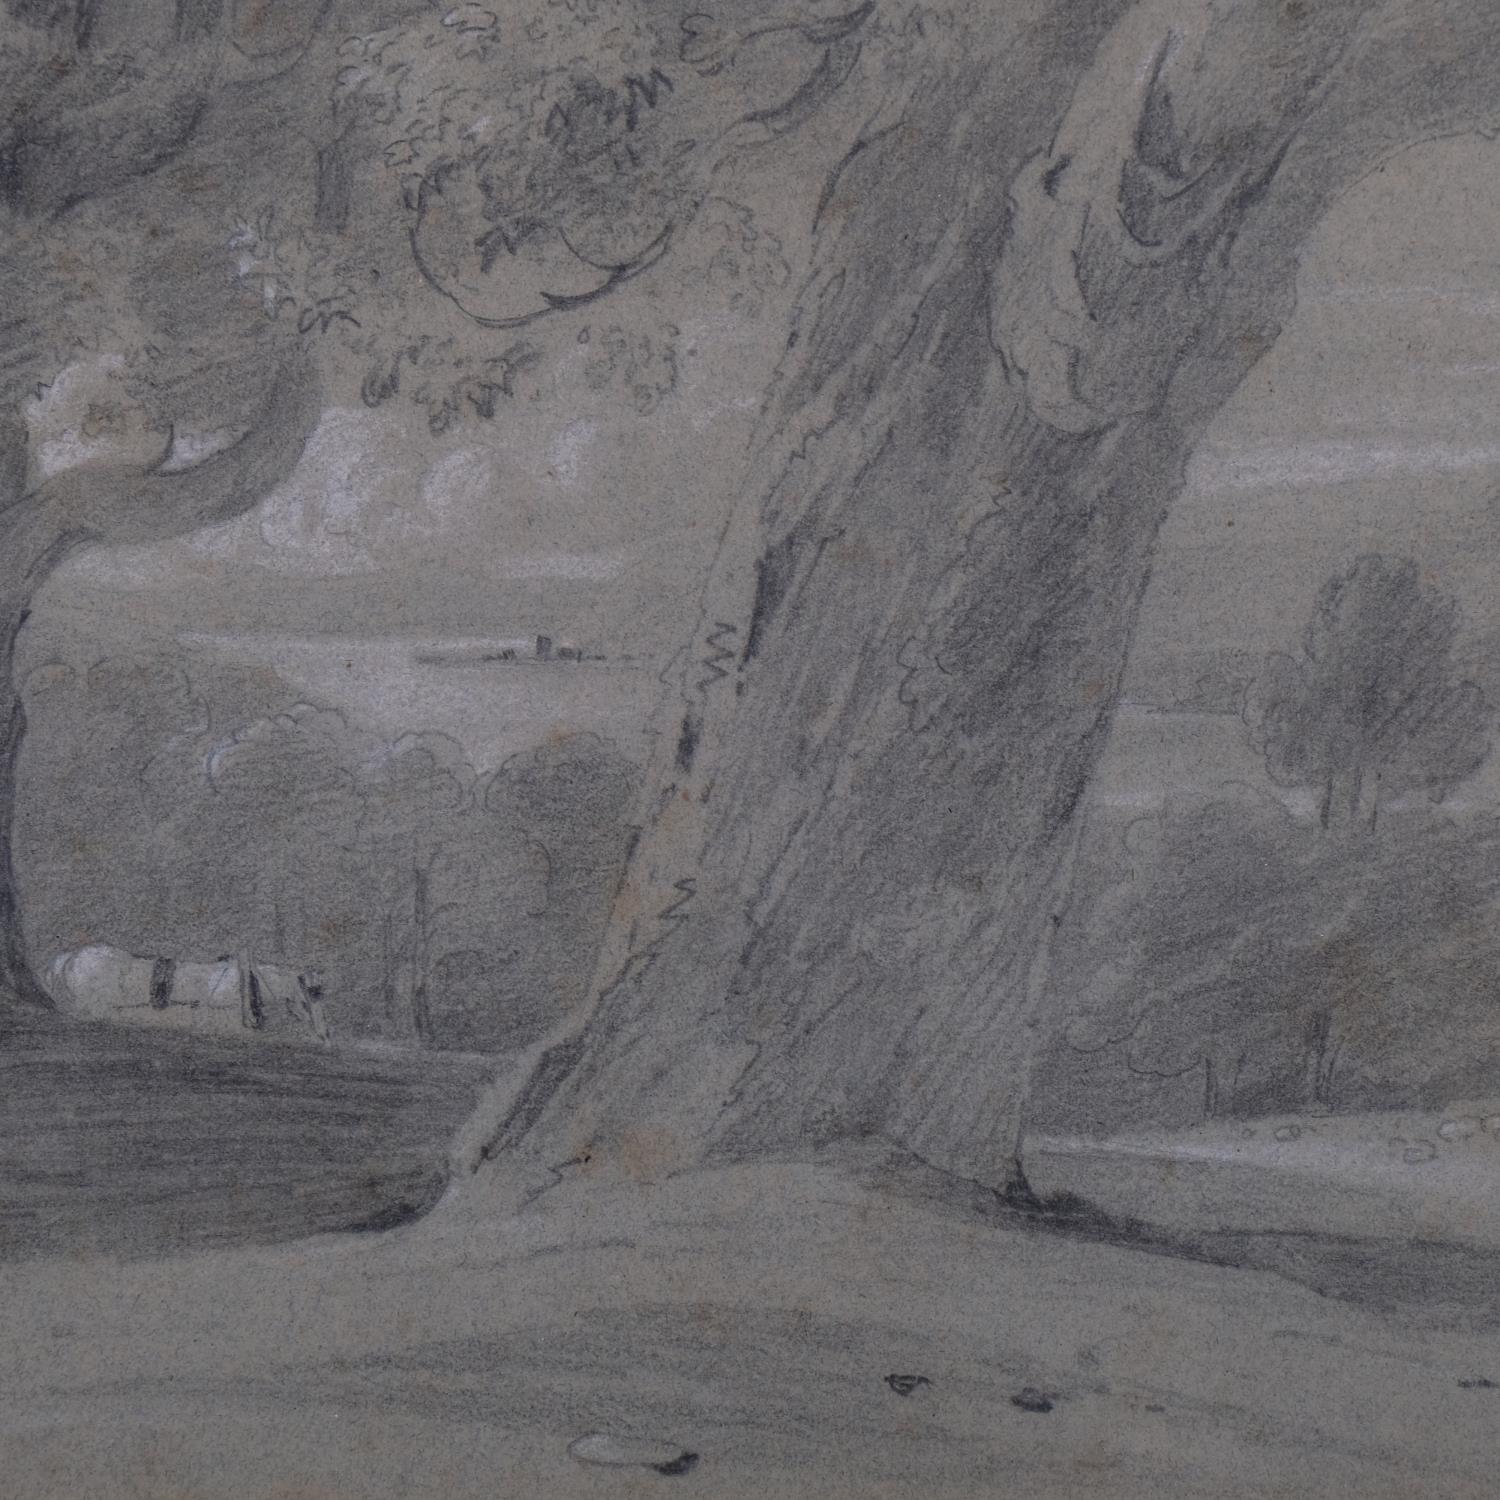 Timber workers in wooded landscape, 19th century pencil/chalk on paper, unsigned, 20cm x 30cm, - Image 3 of 4